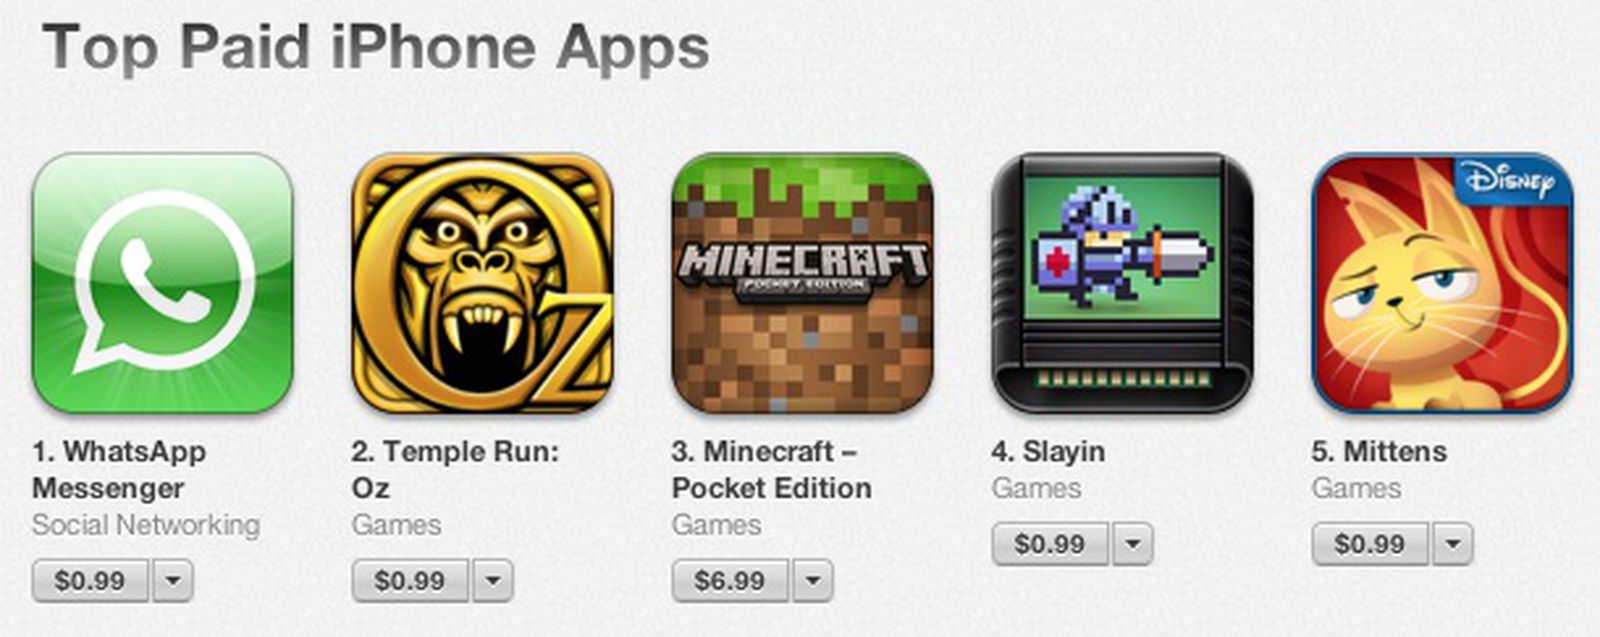 Minecraft: Pocket Edition 2 is fifth highest rated paid app on iOS